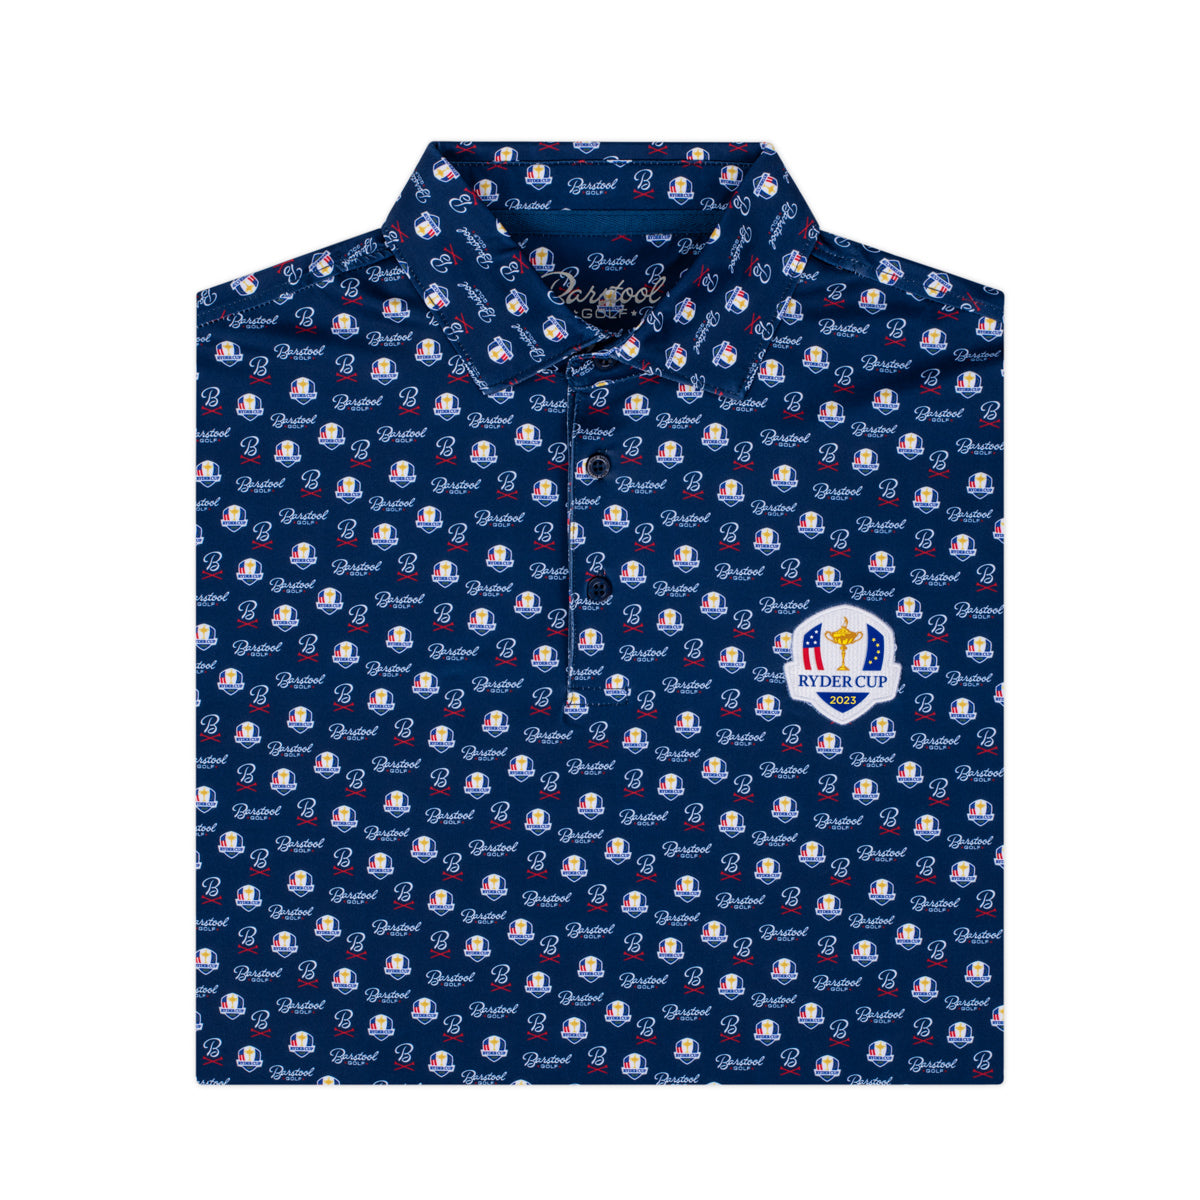 Barstool Golf x Ryder Cup Printed Polo-Polos-Fore Play-Navy-S-Barstool Sports